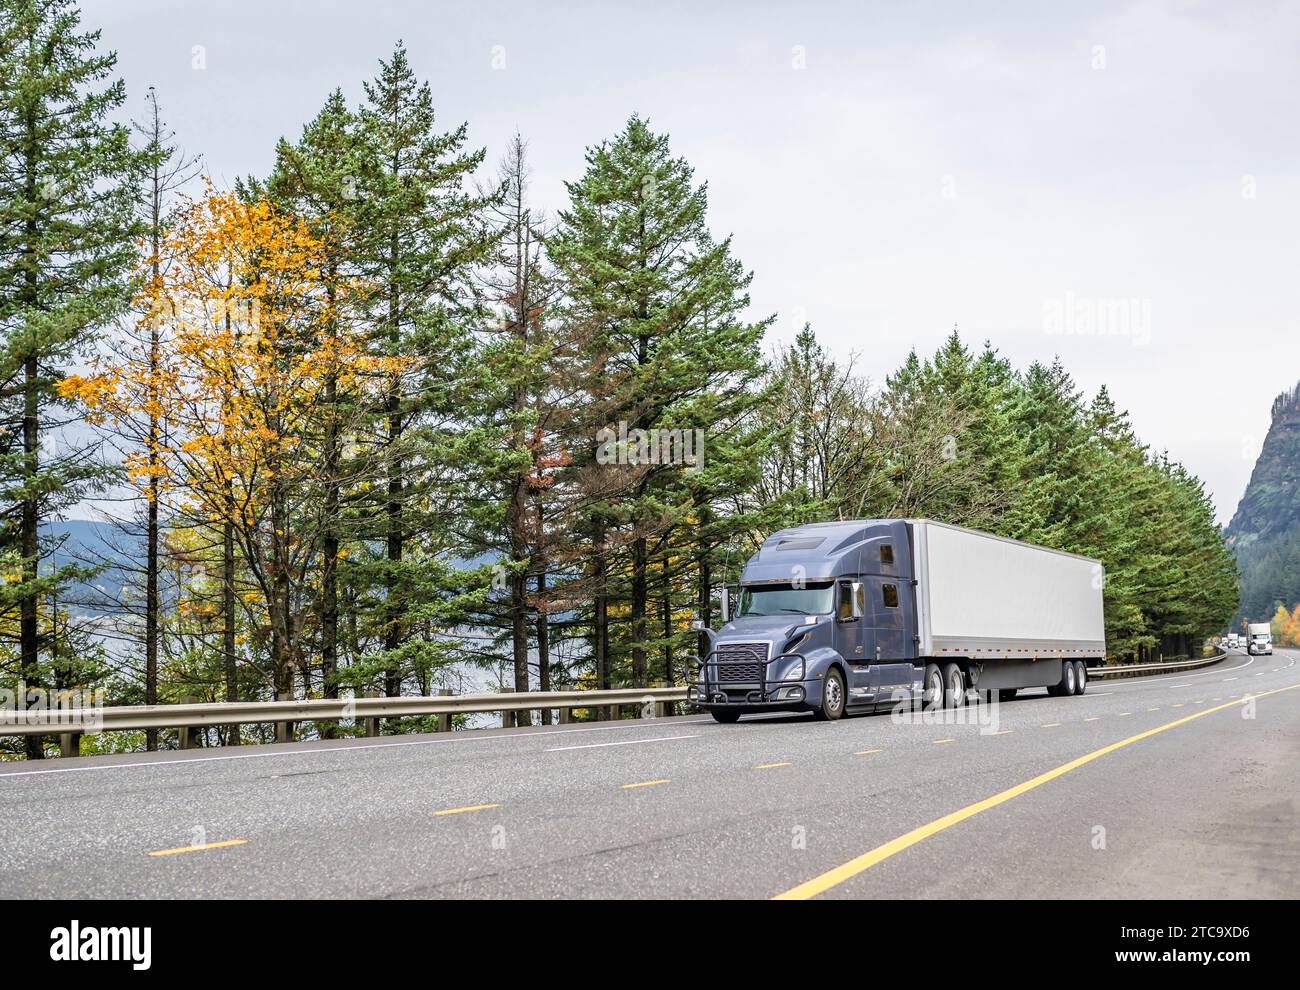 Classic carrier big rig gray semi truck with extended cab for truck driver rest transporting cargo in dry van semi trailer driving on highway road wit Stock Photo